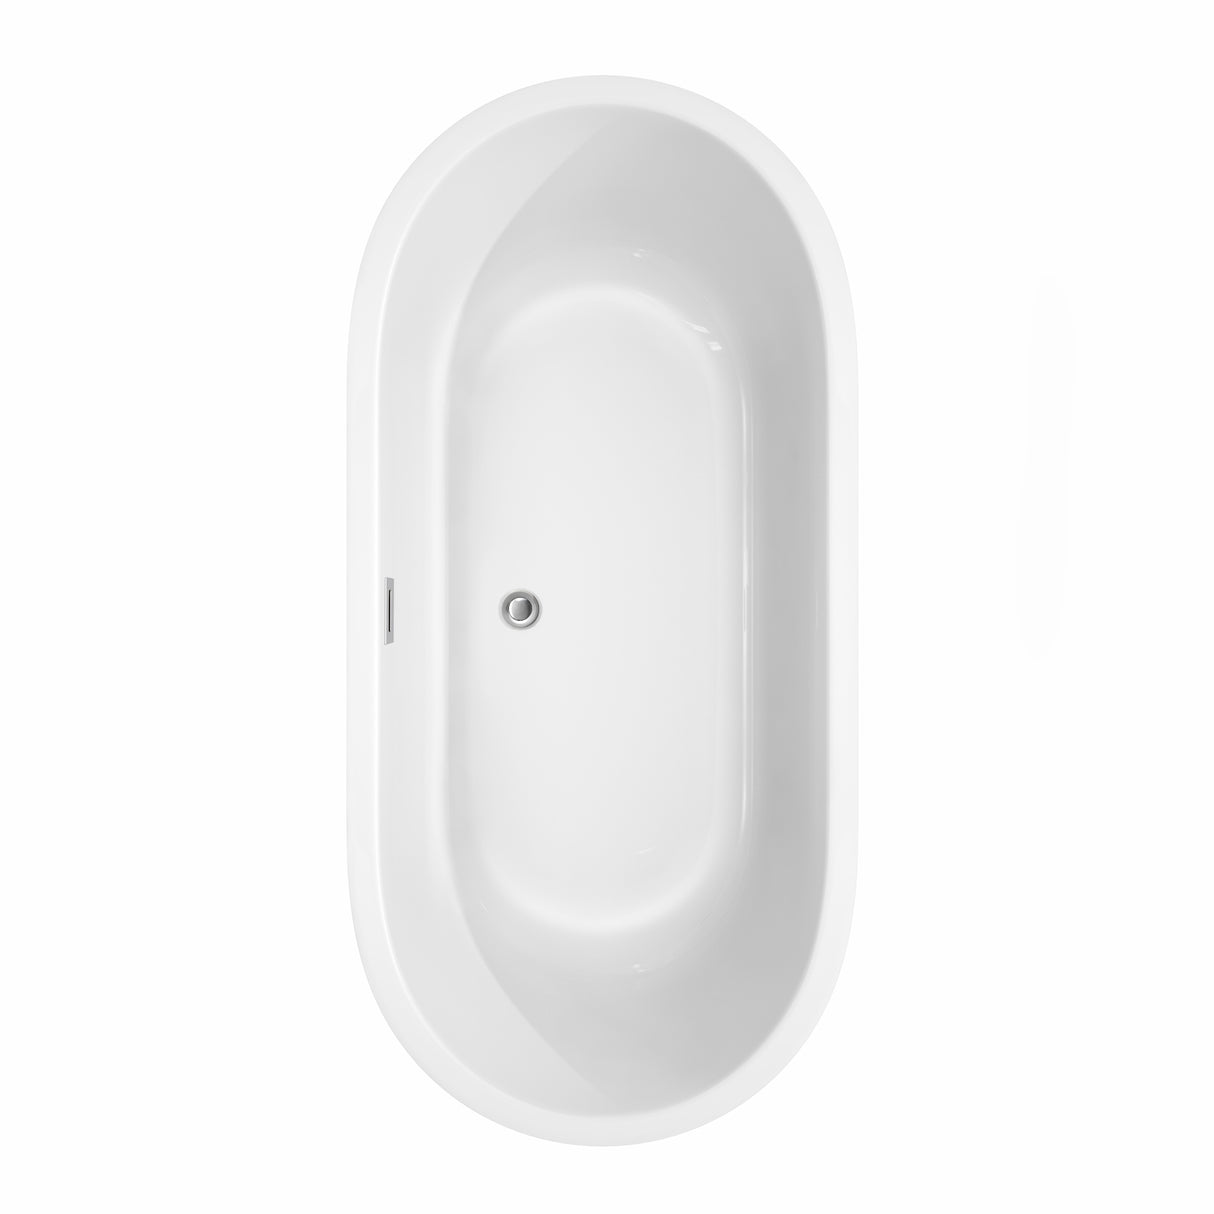 Juliette 67 Inch Freestanding Bathtub in White with Polished Chrome Drain and Overflow Trim